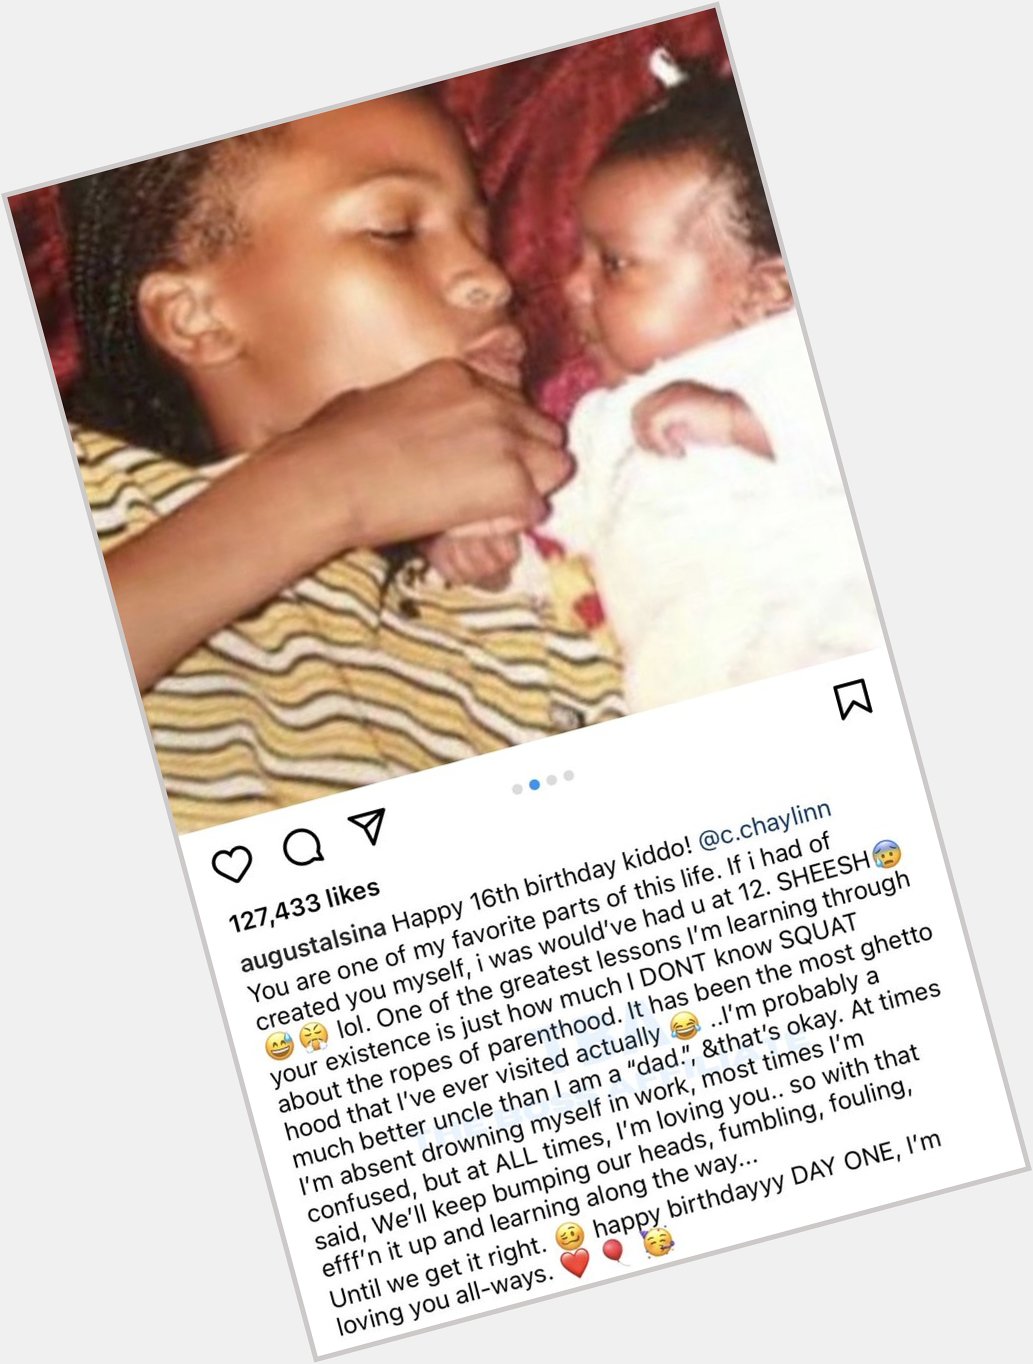 August Alsina wishes his niece a happy birthday 